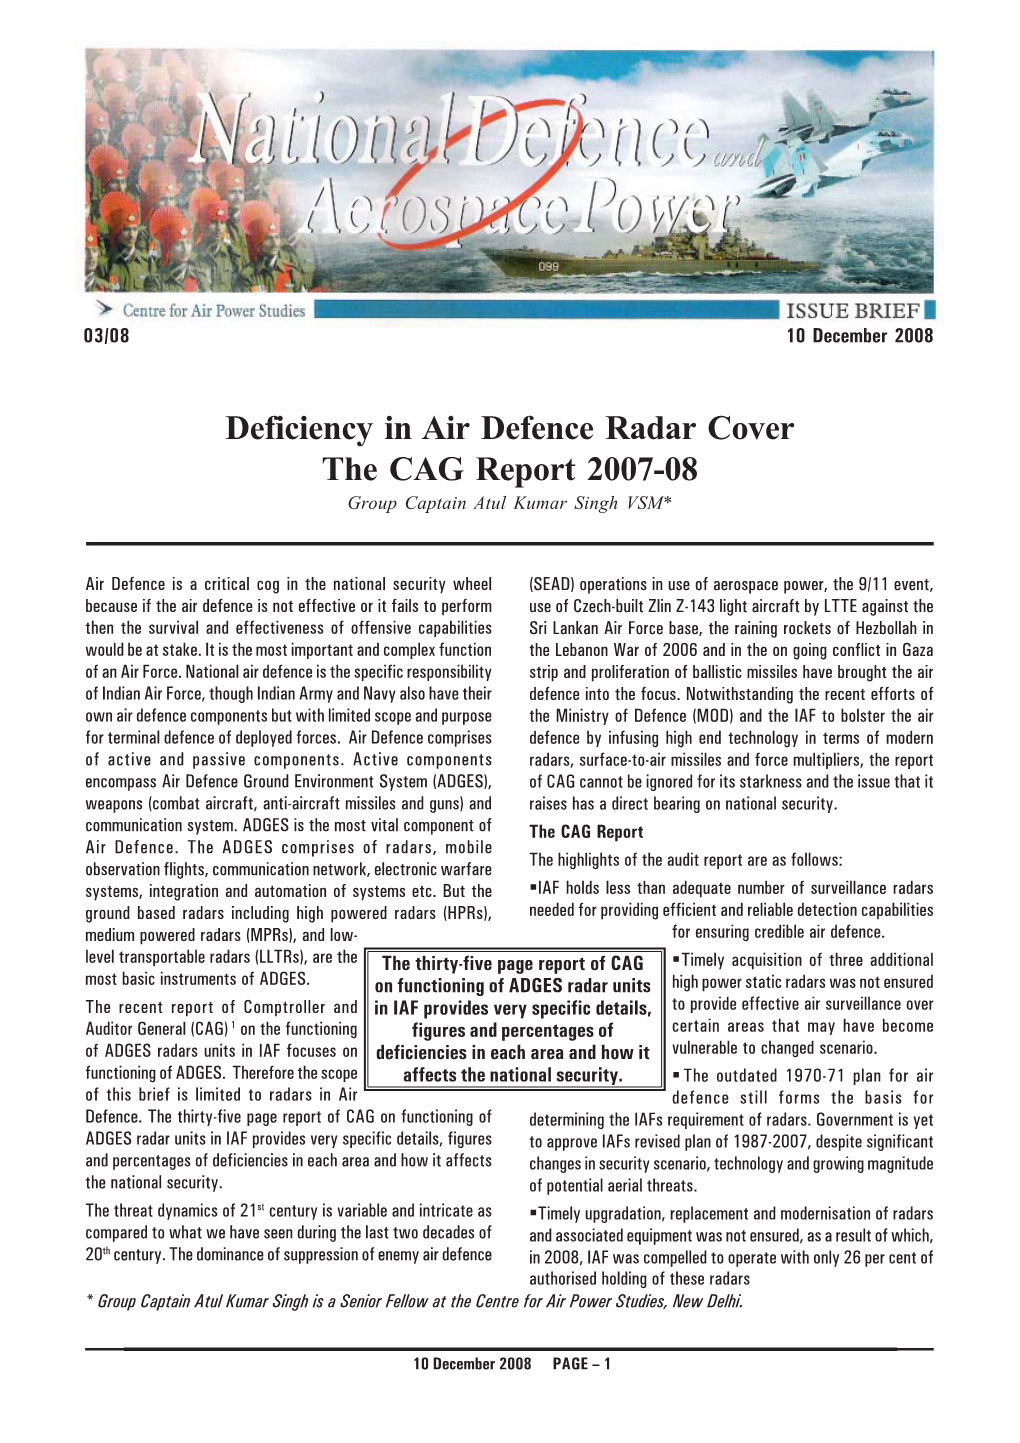 Deficiency in Air Defence Radar Cover the CAG Report 2007-08 Group Captain Atul Kumar Singh VSM*